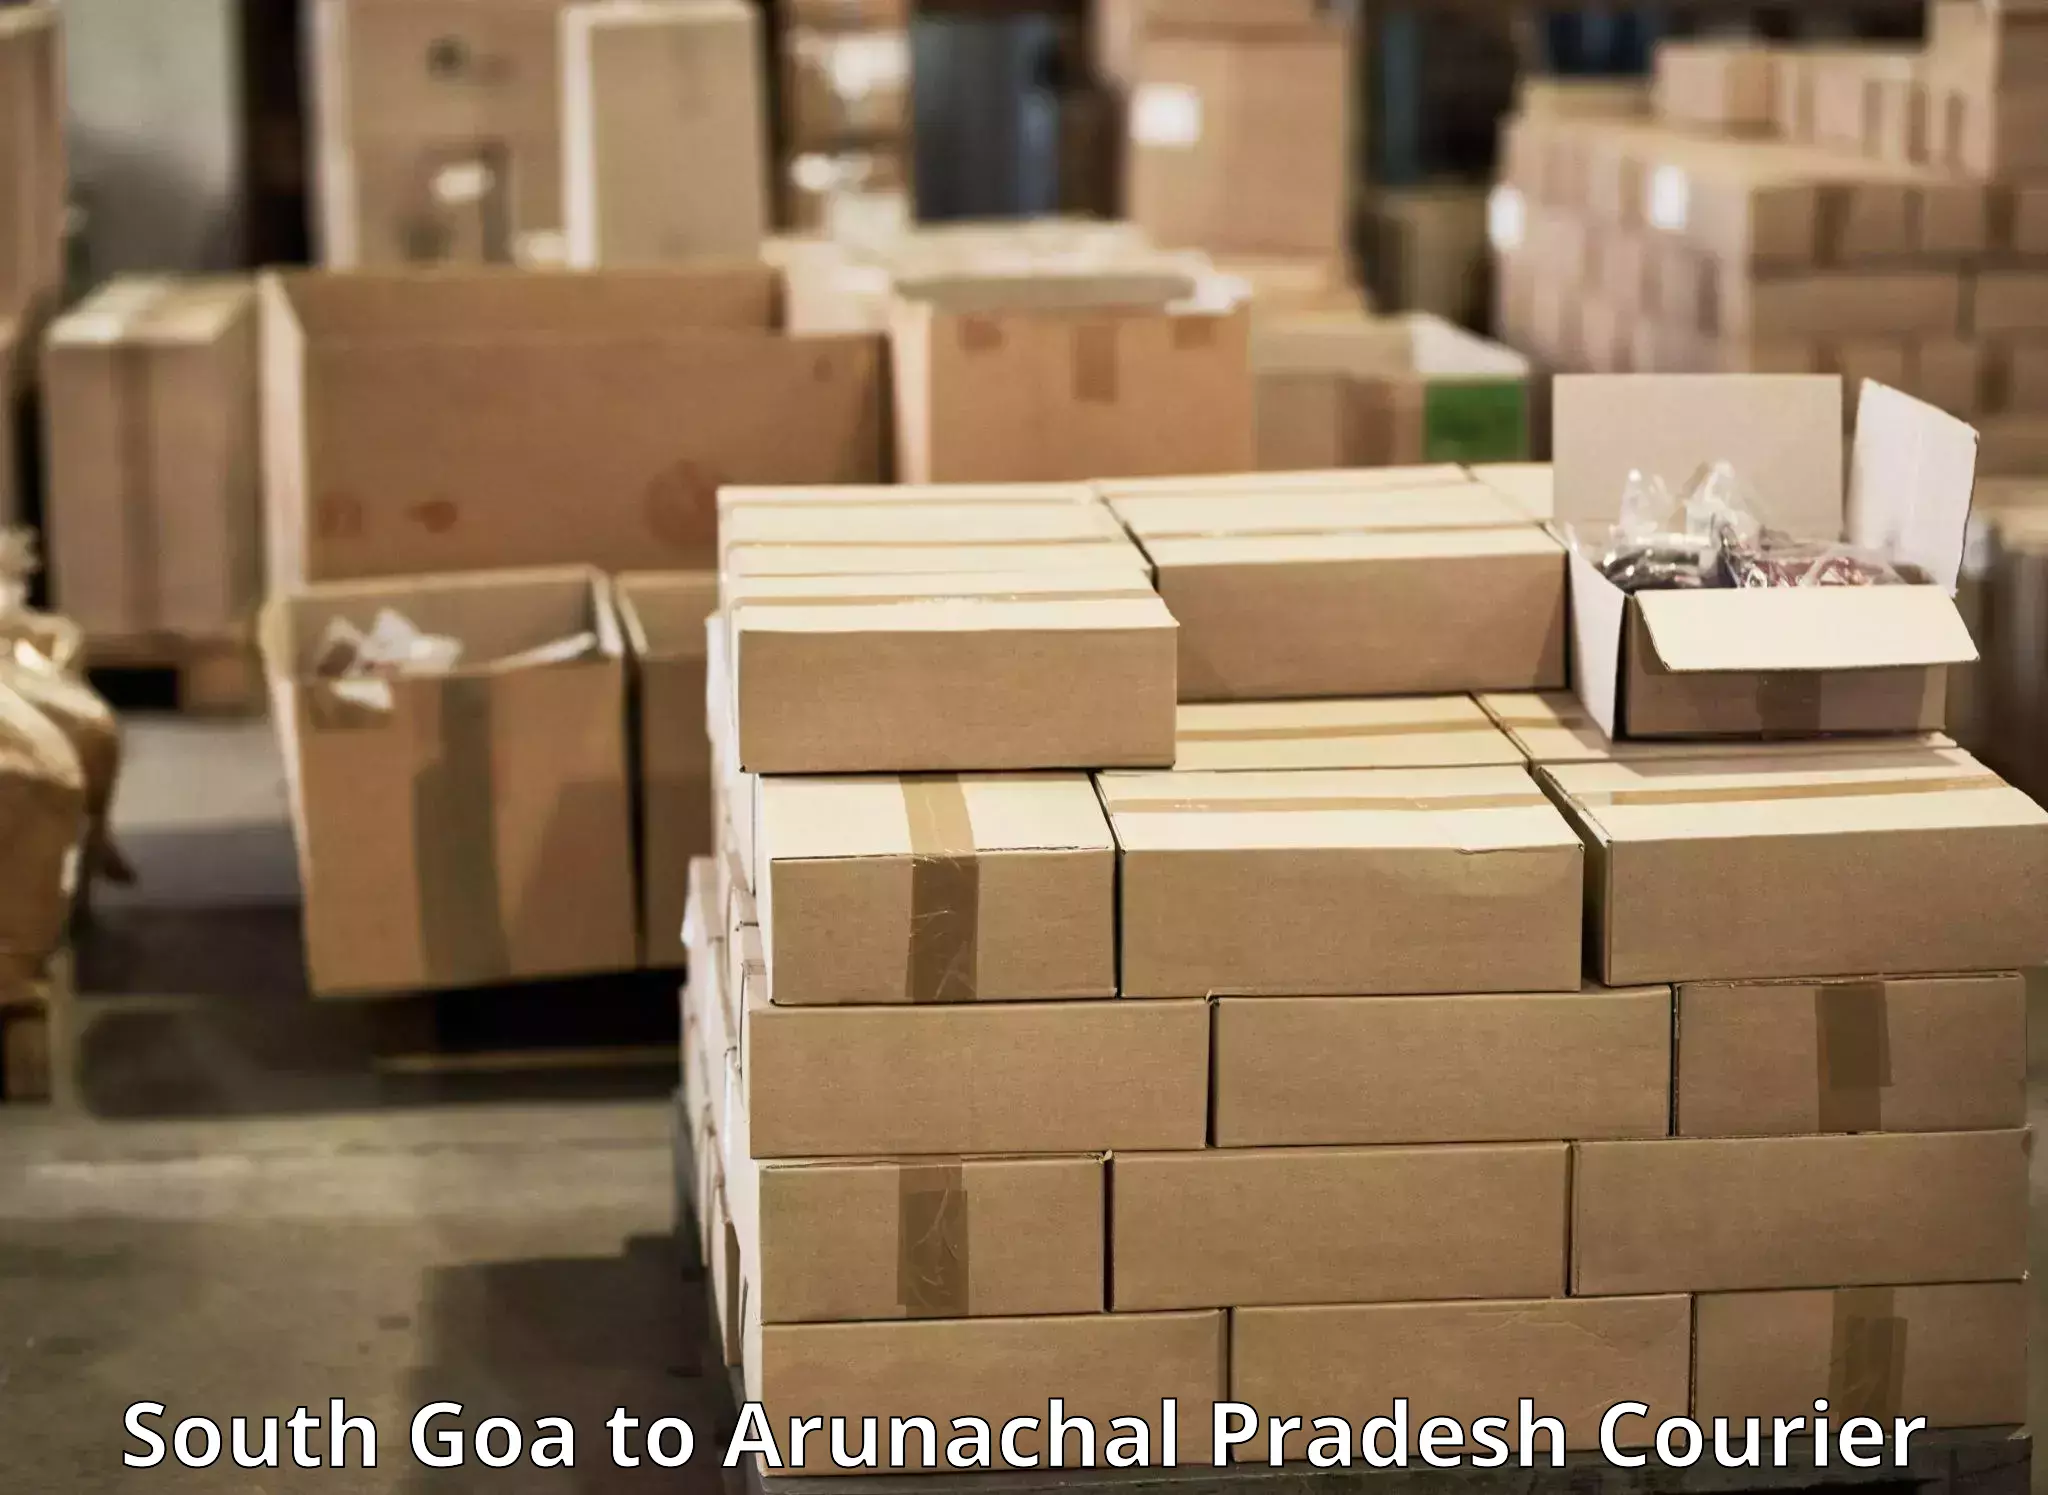 Expedited parcel delivery South Goa to Arunachal Pradesh